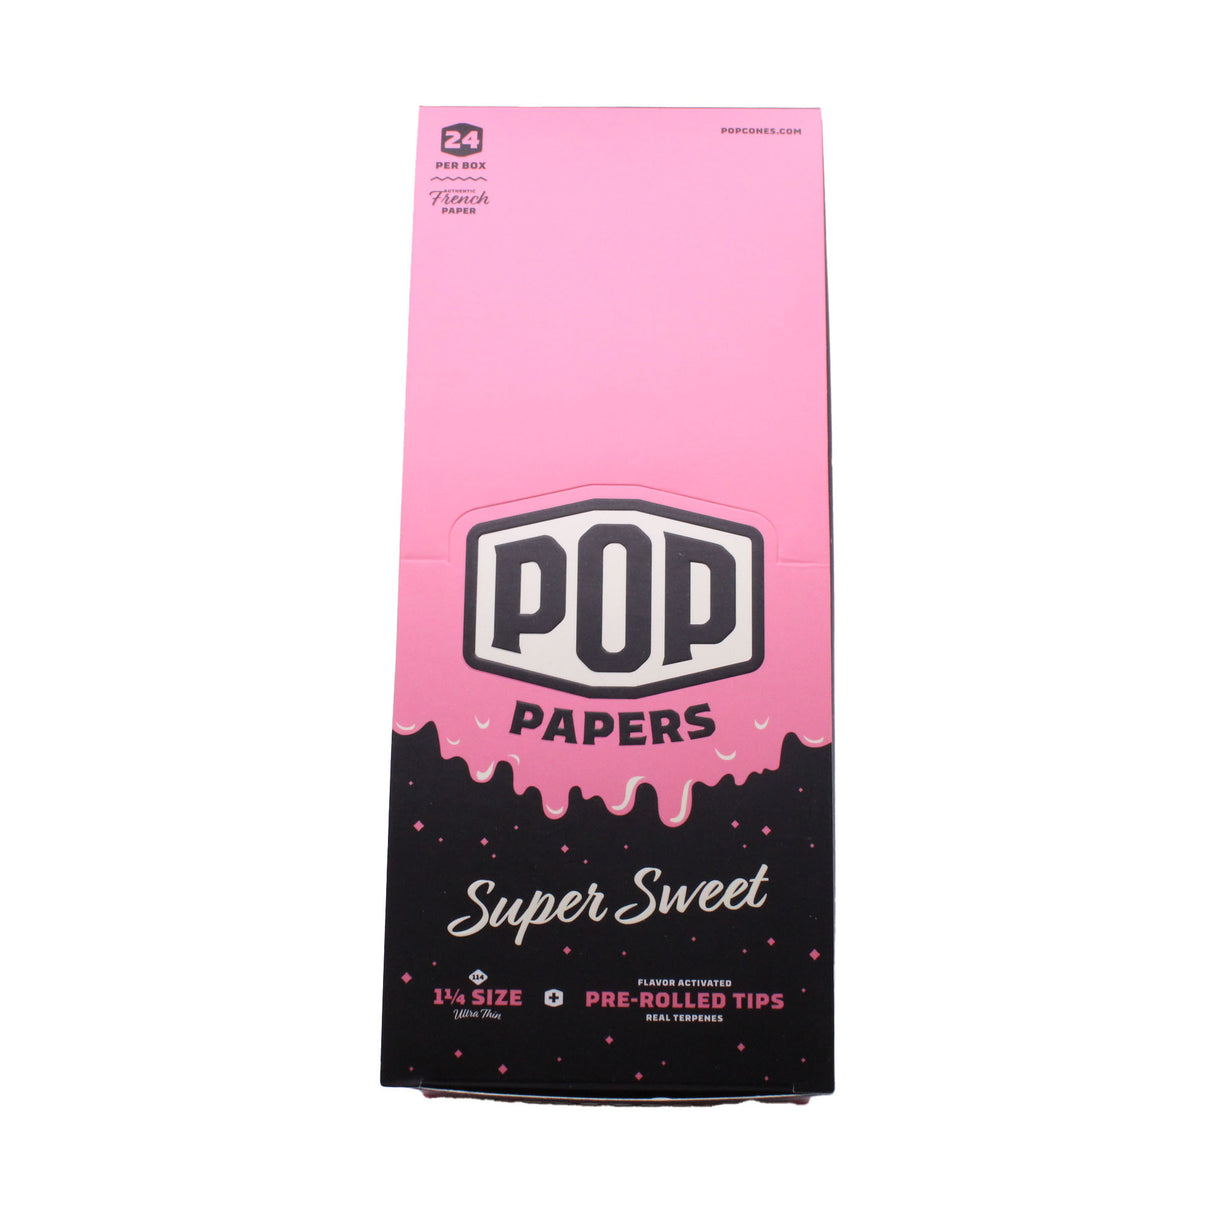 Pop Papers Rolling Papers and Tips - 1 1/4" Size